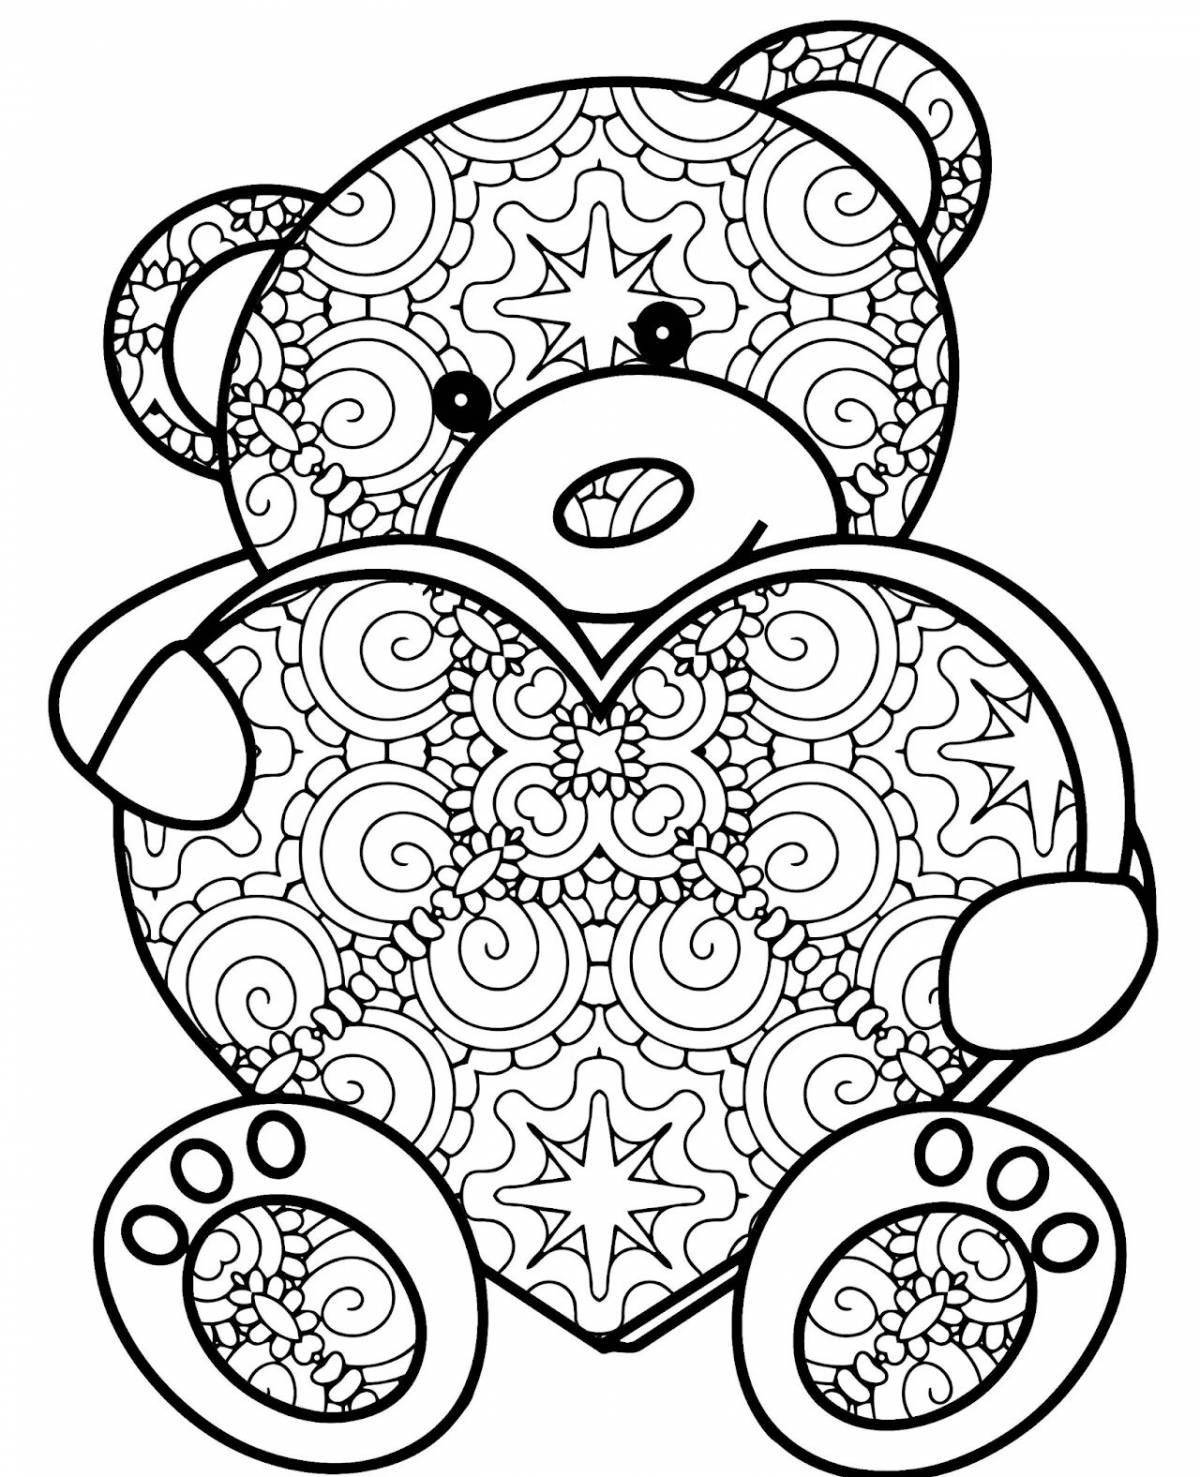 Amazing new coloring pages